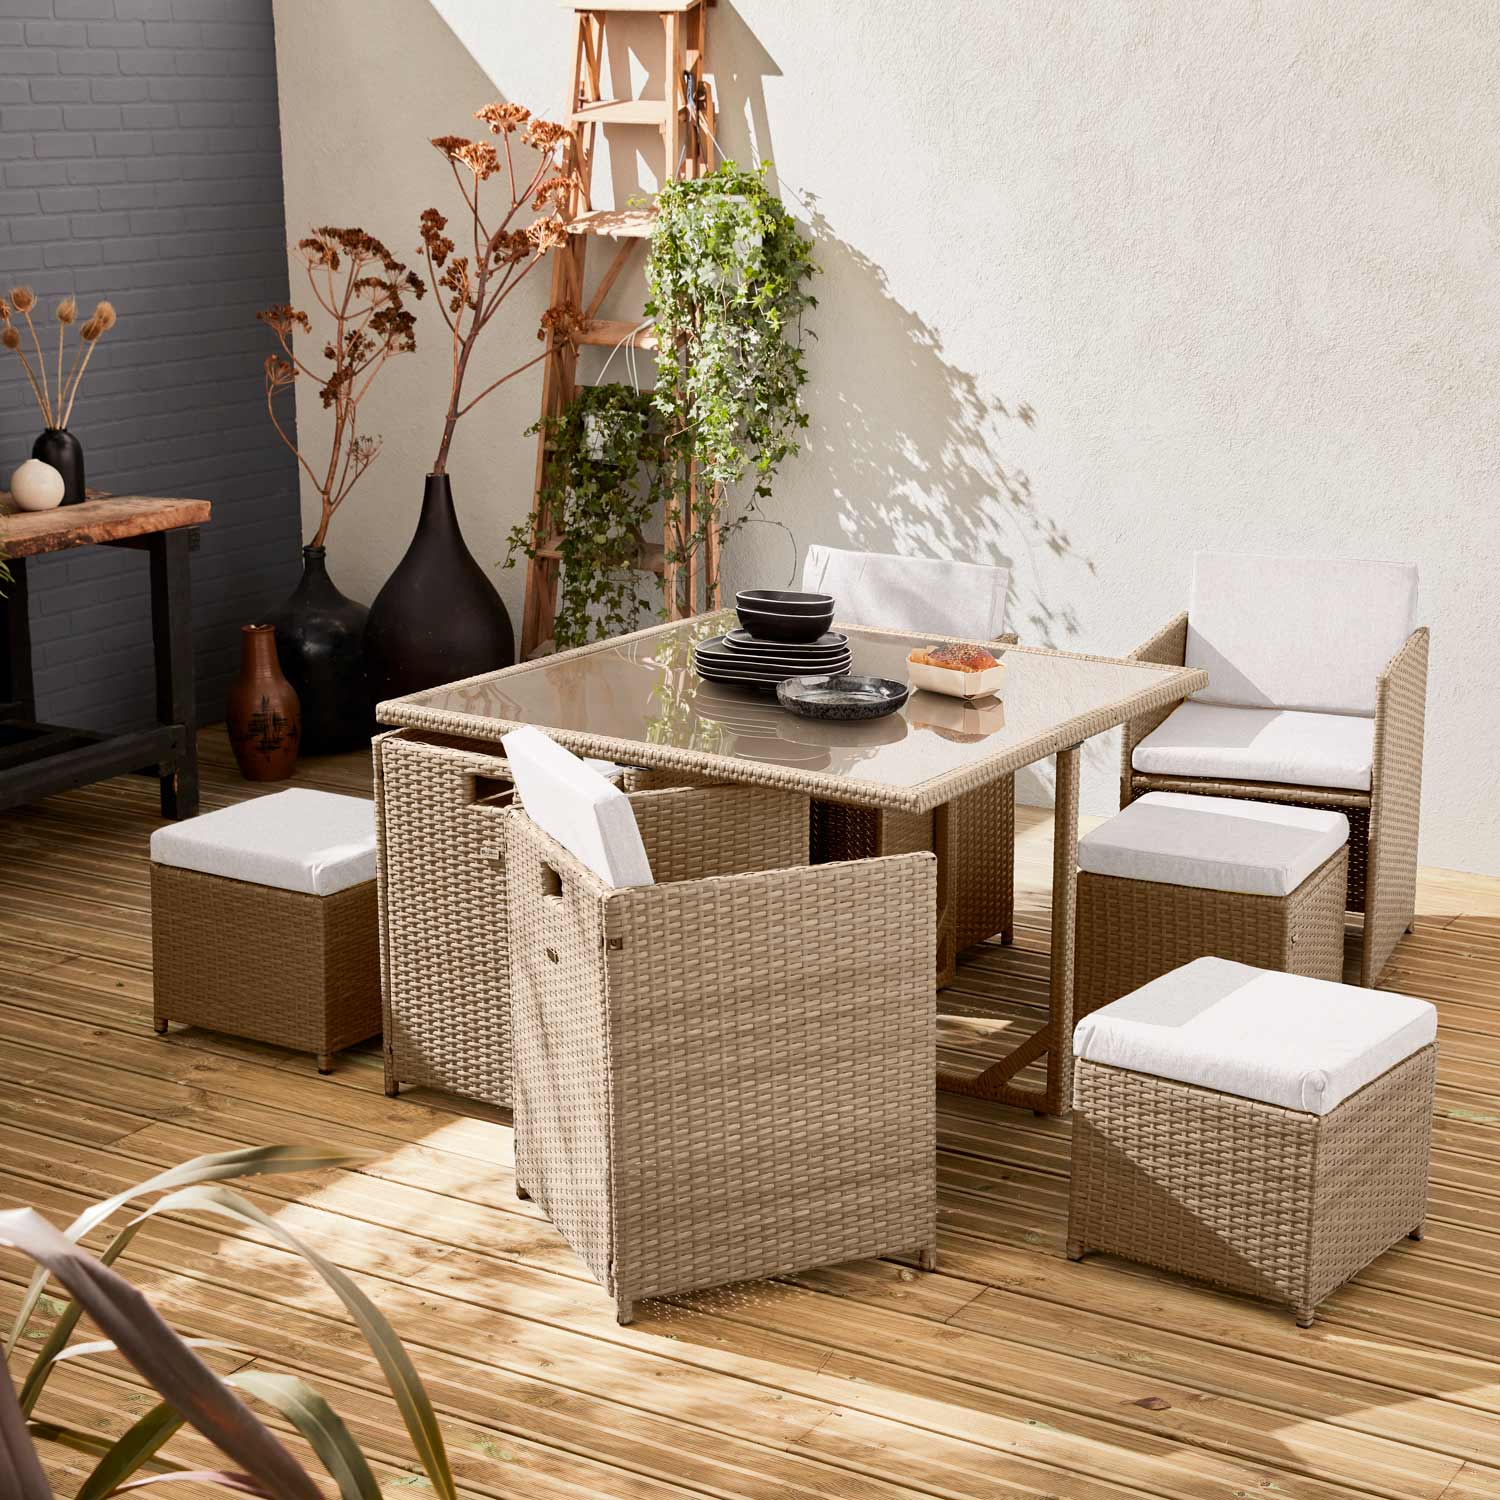 VABO 8 Seater 110cm Dining Set | Natural Wicker/Beige Cushions